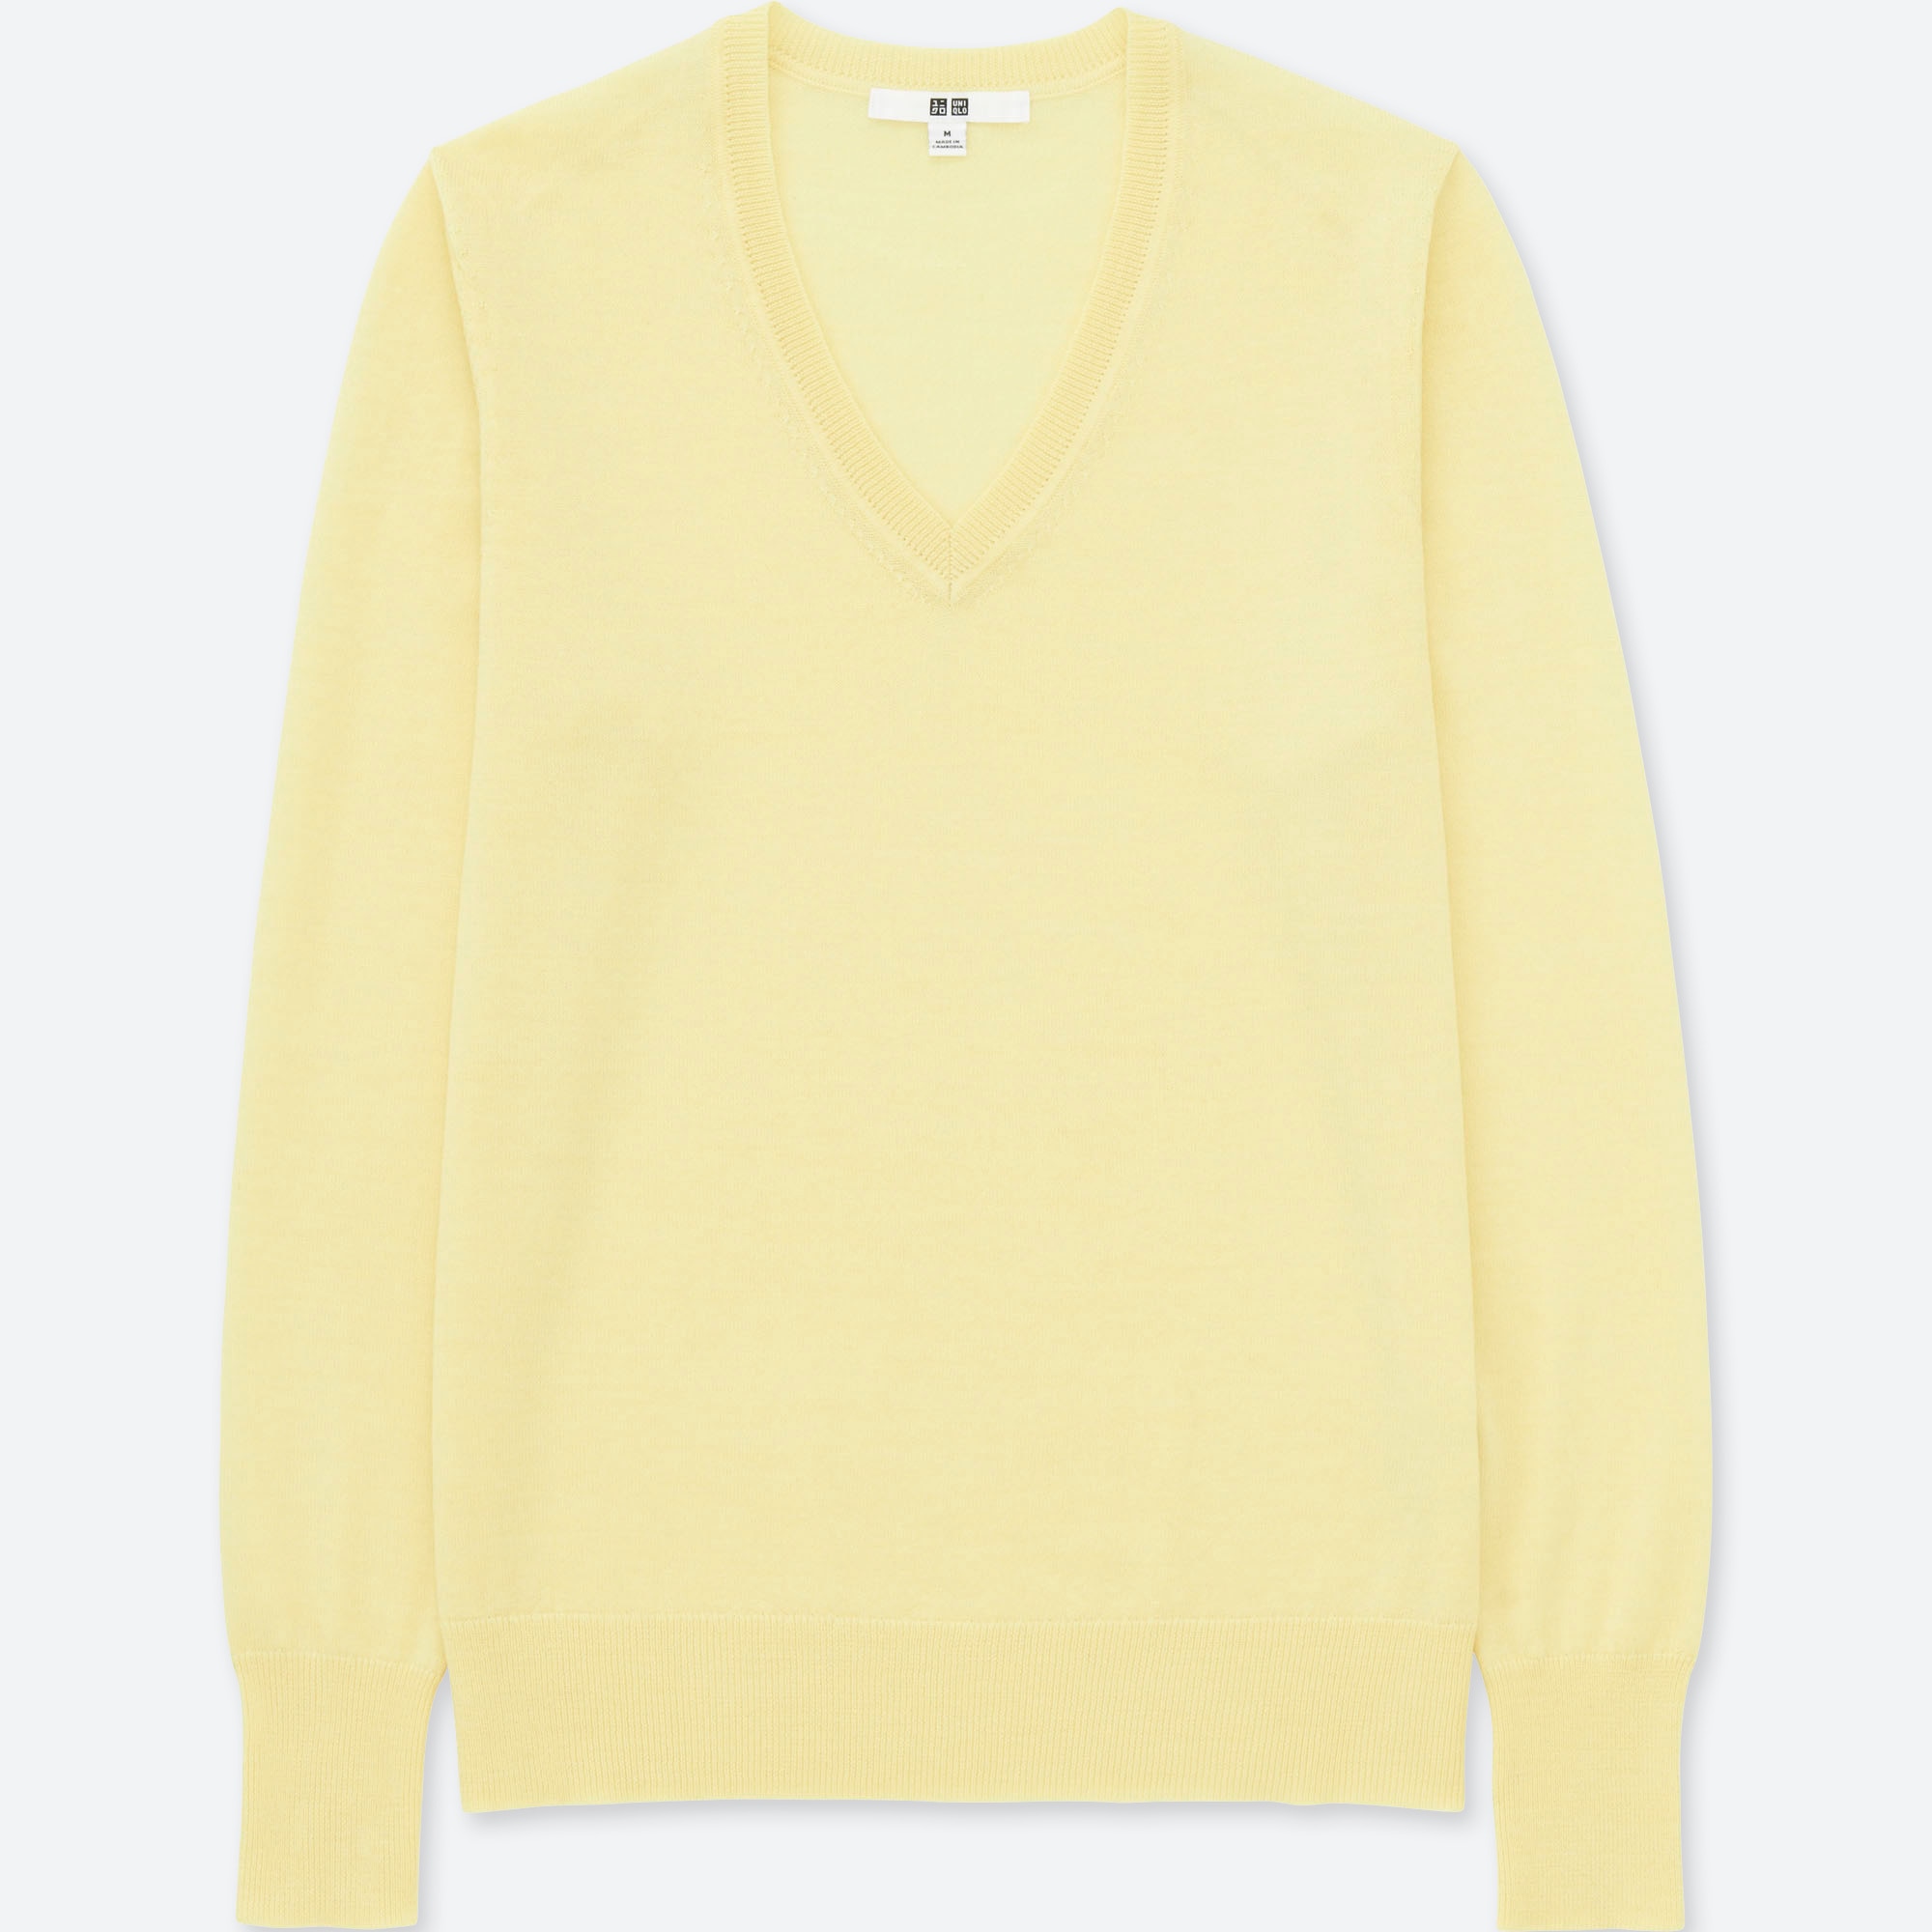 Uniqlo Mens Cashmere Sweaters Are Up to 50 Off  InsideHook